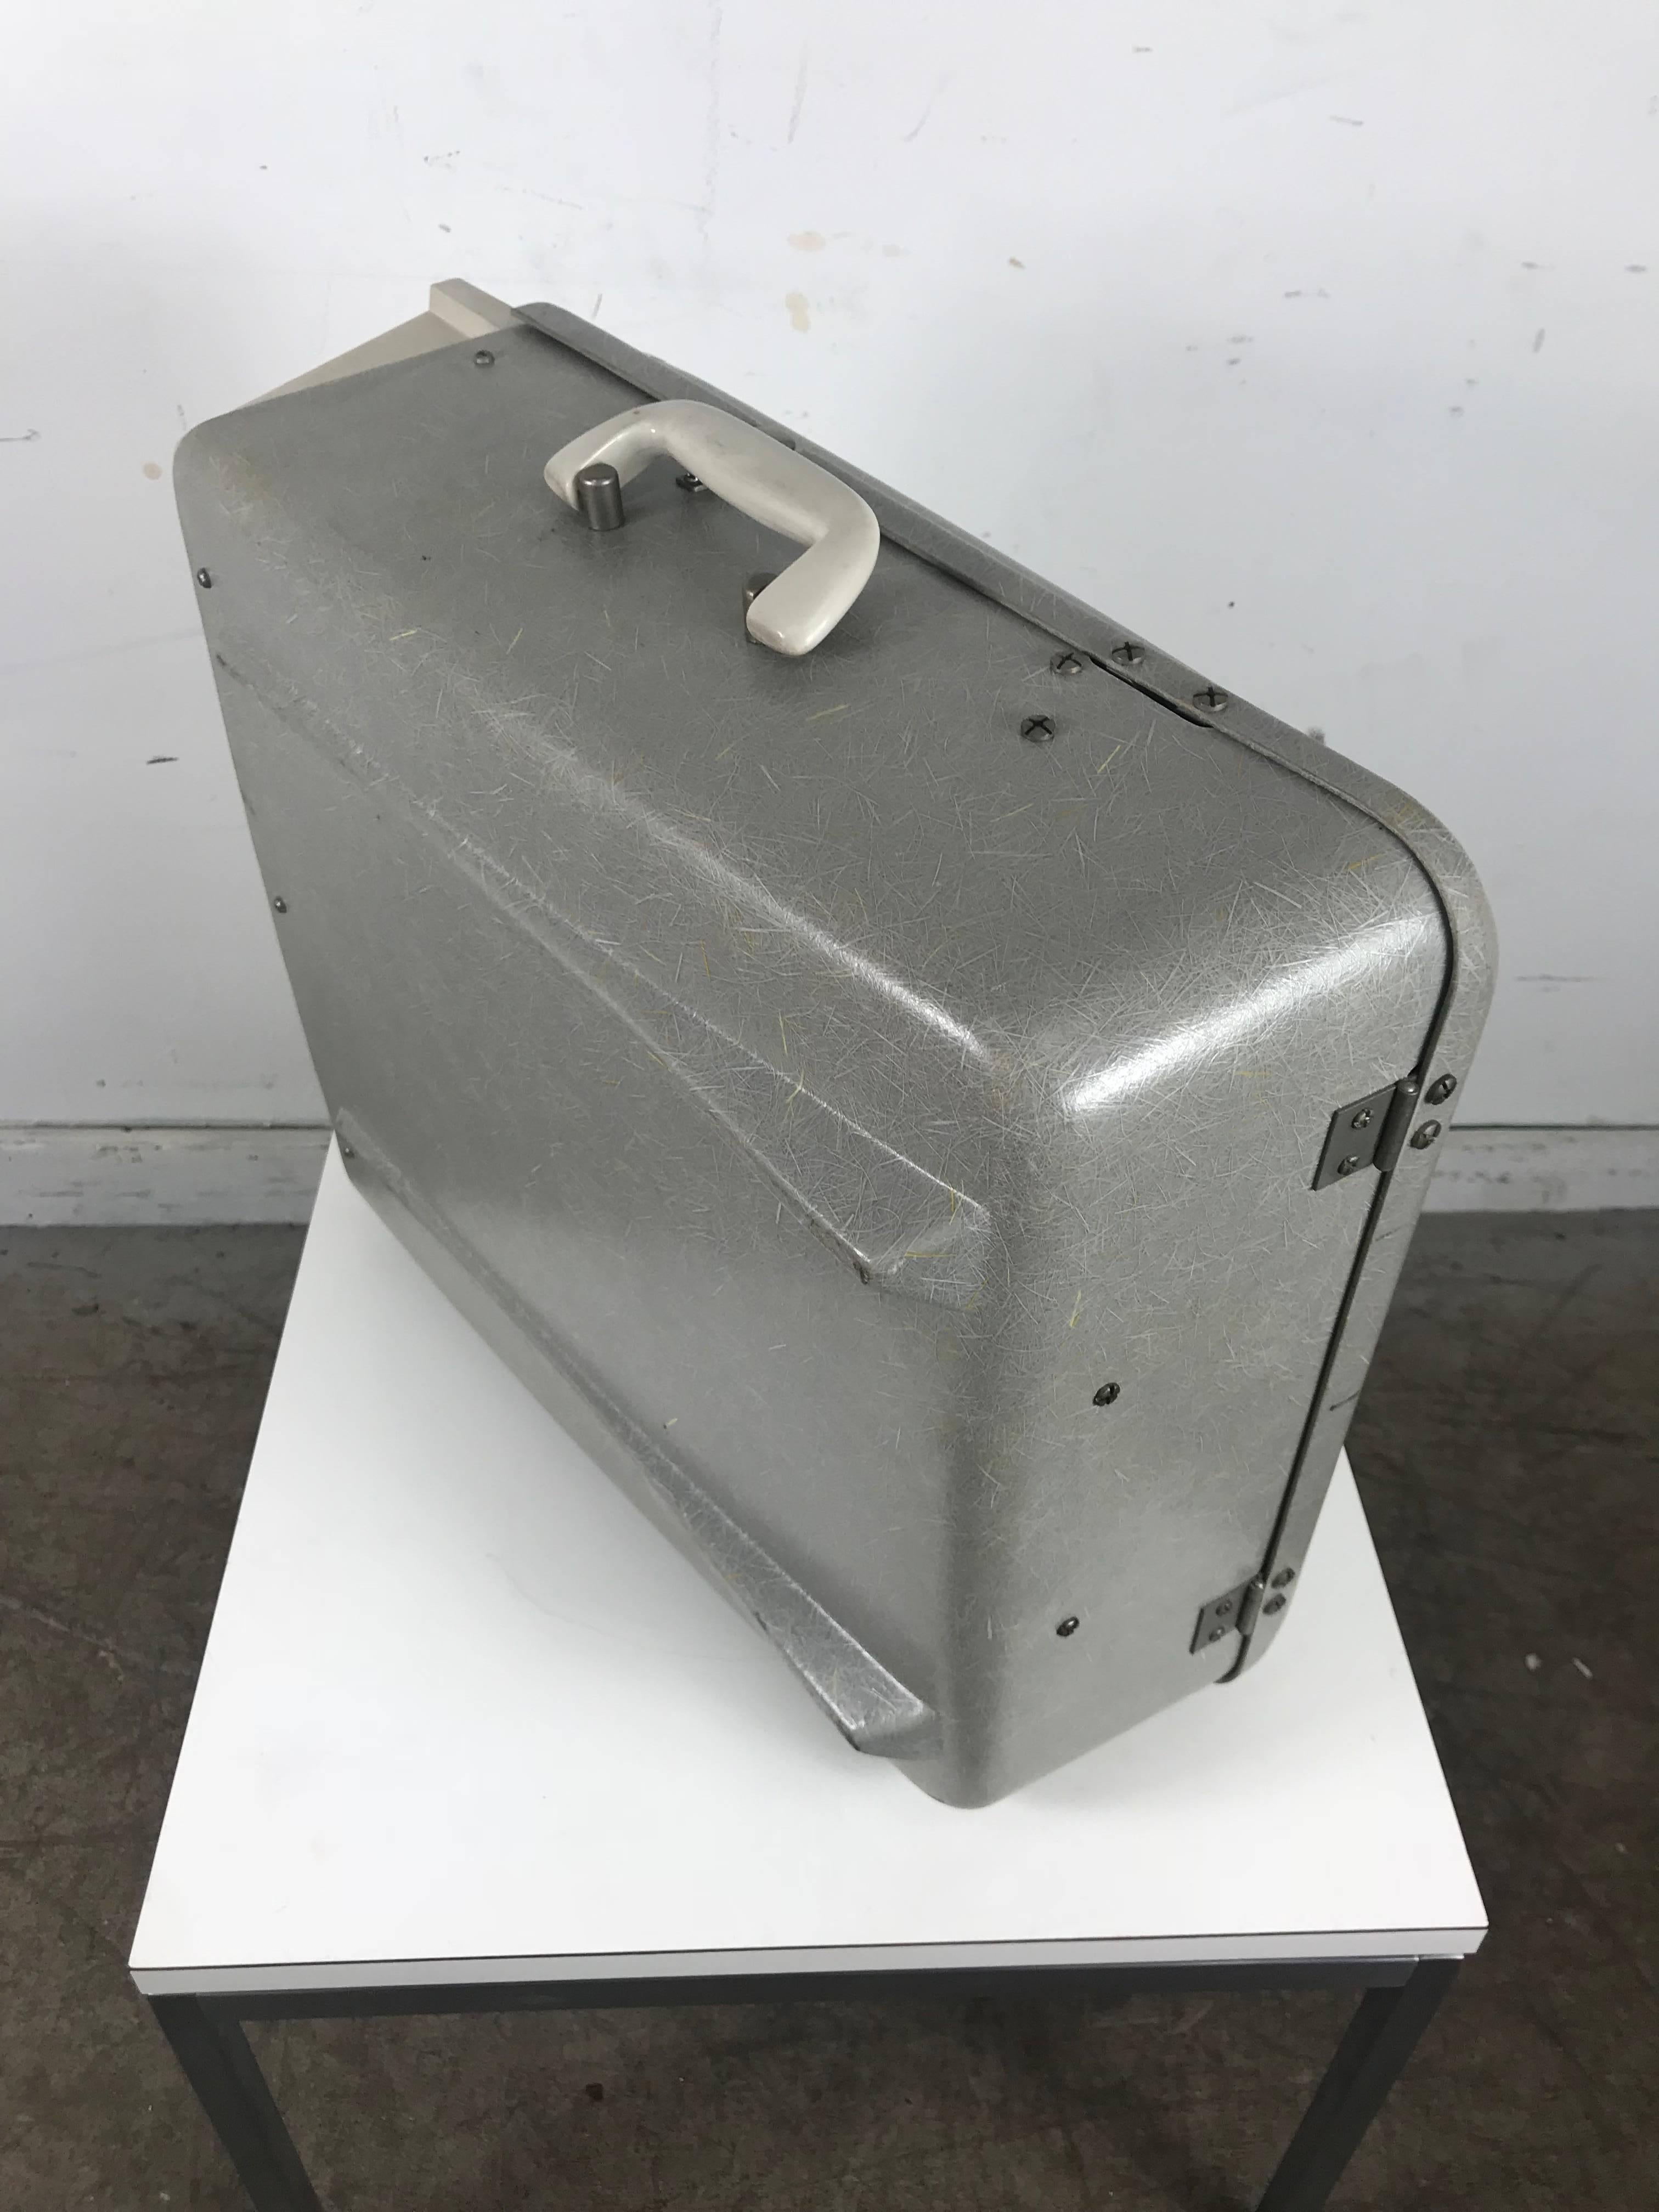 Classic midcentury silvertone syntronic fiberglass portable suitcase record player and radio, elusive exposed fiberglass outer shell body, reminiscent of Classic Charles Eames elephant hide zenith arm shell chairs, amazing condition! Record player